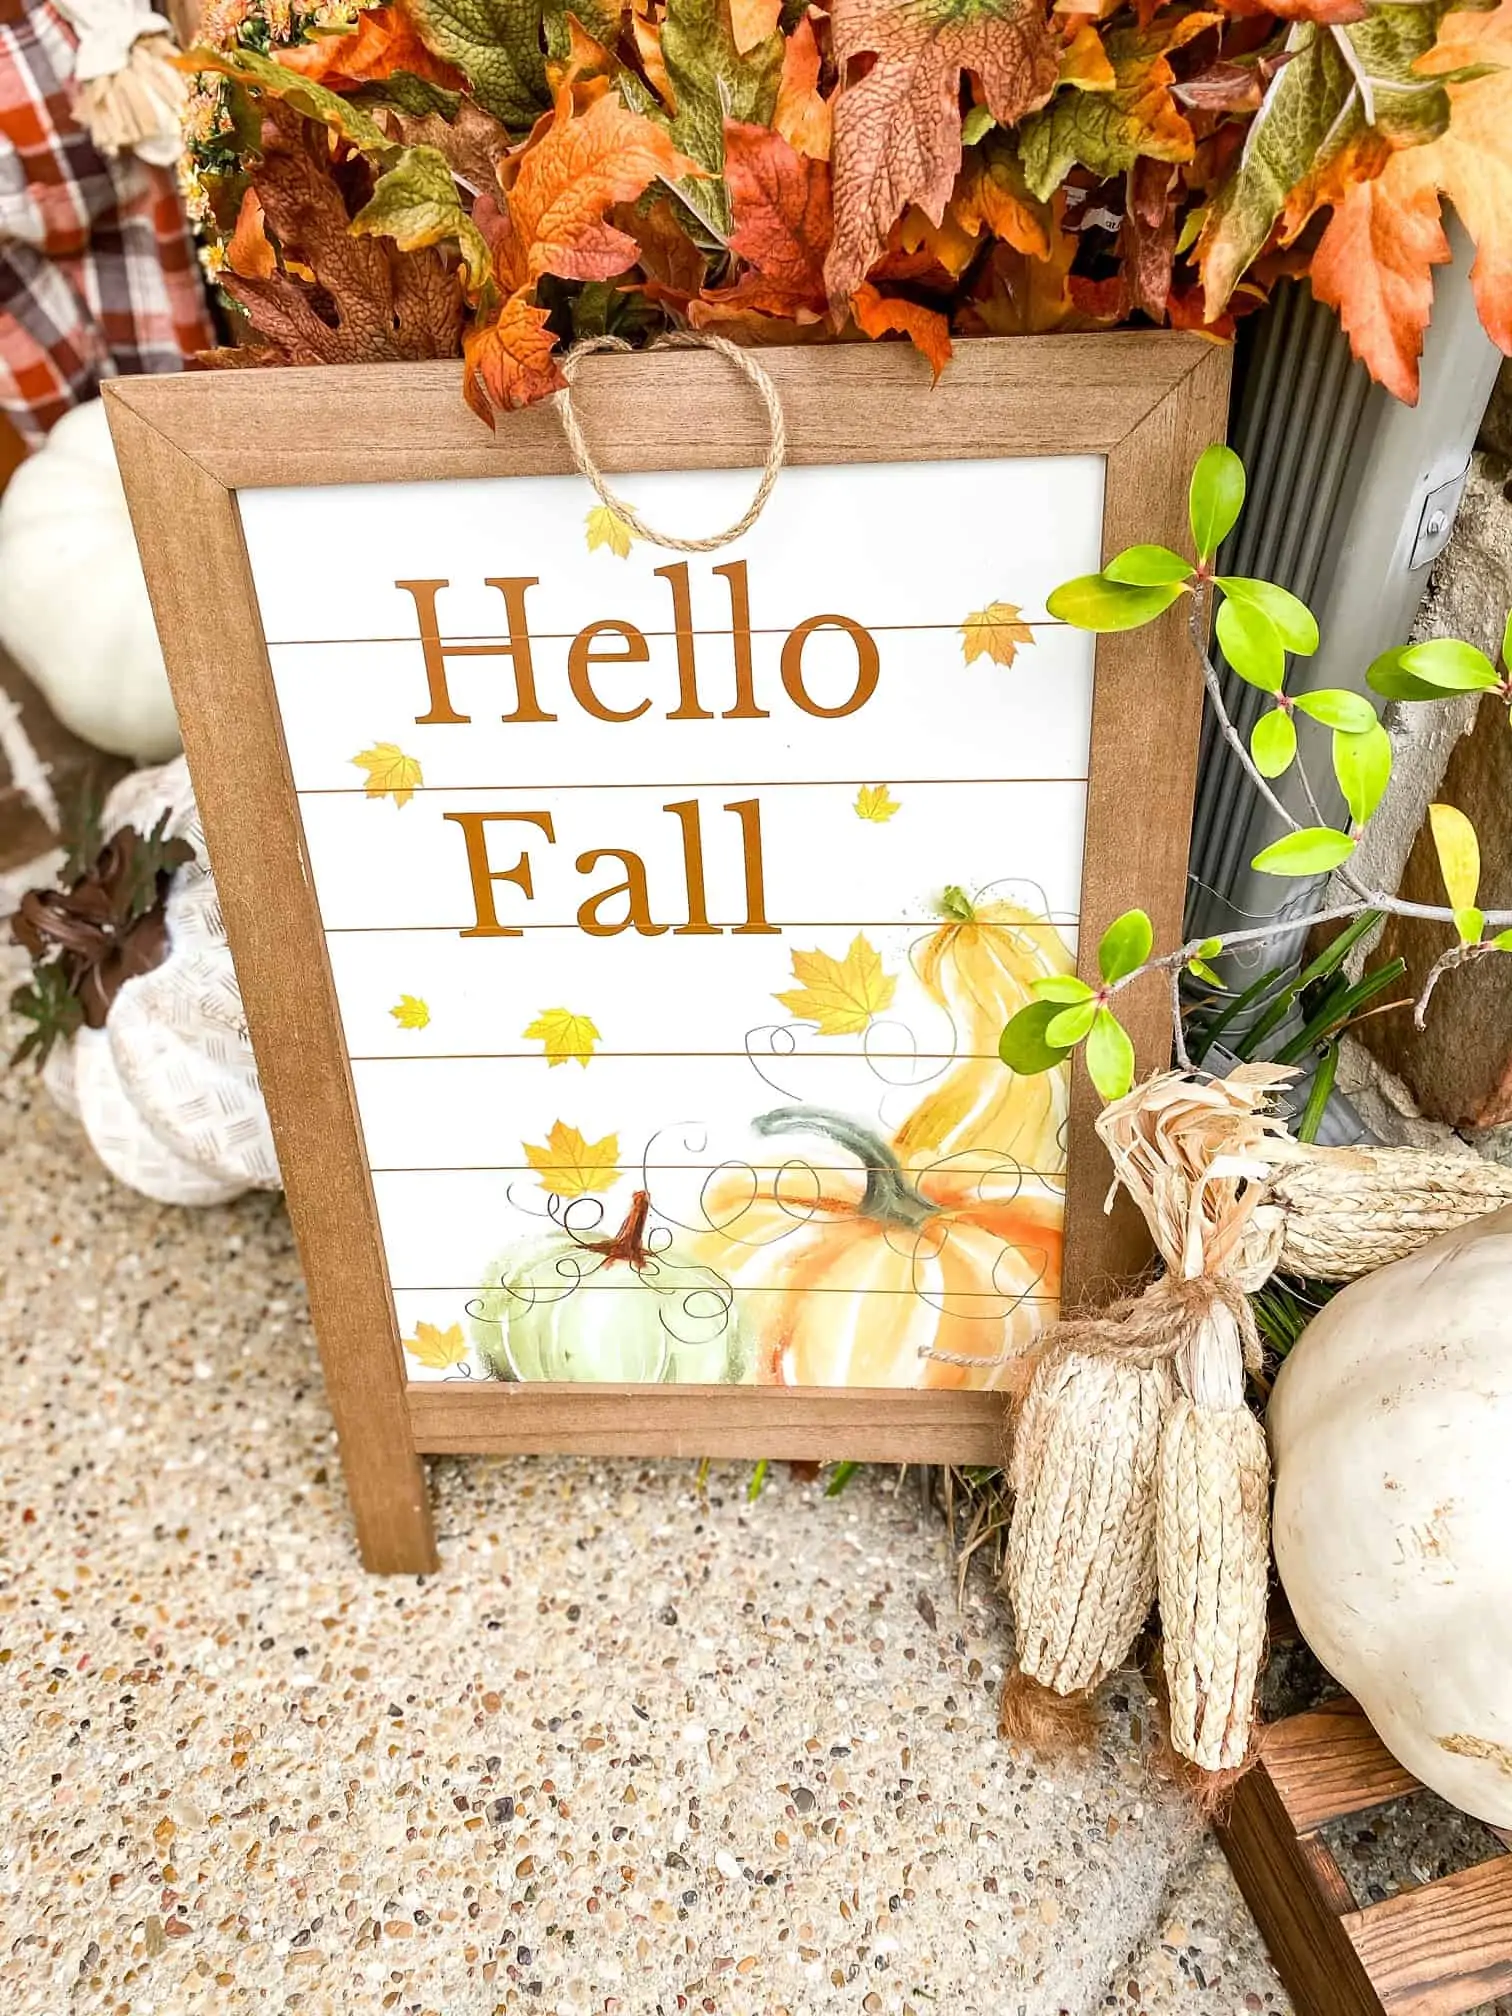 Fall Front Porch Ideas by popular Dallas life and style blog, Glamorous Versatility: image of two doodle breed dogs sitting on a front porch that decorated with a At Home scarecrow, At home Give Thanks sign, At Home pumpkin Welcome sign, At Home wagon, At home Styrofoam pumpkins, potted mums, At Home Hello Fall wooden sign, and At Home fall wreath. 